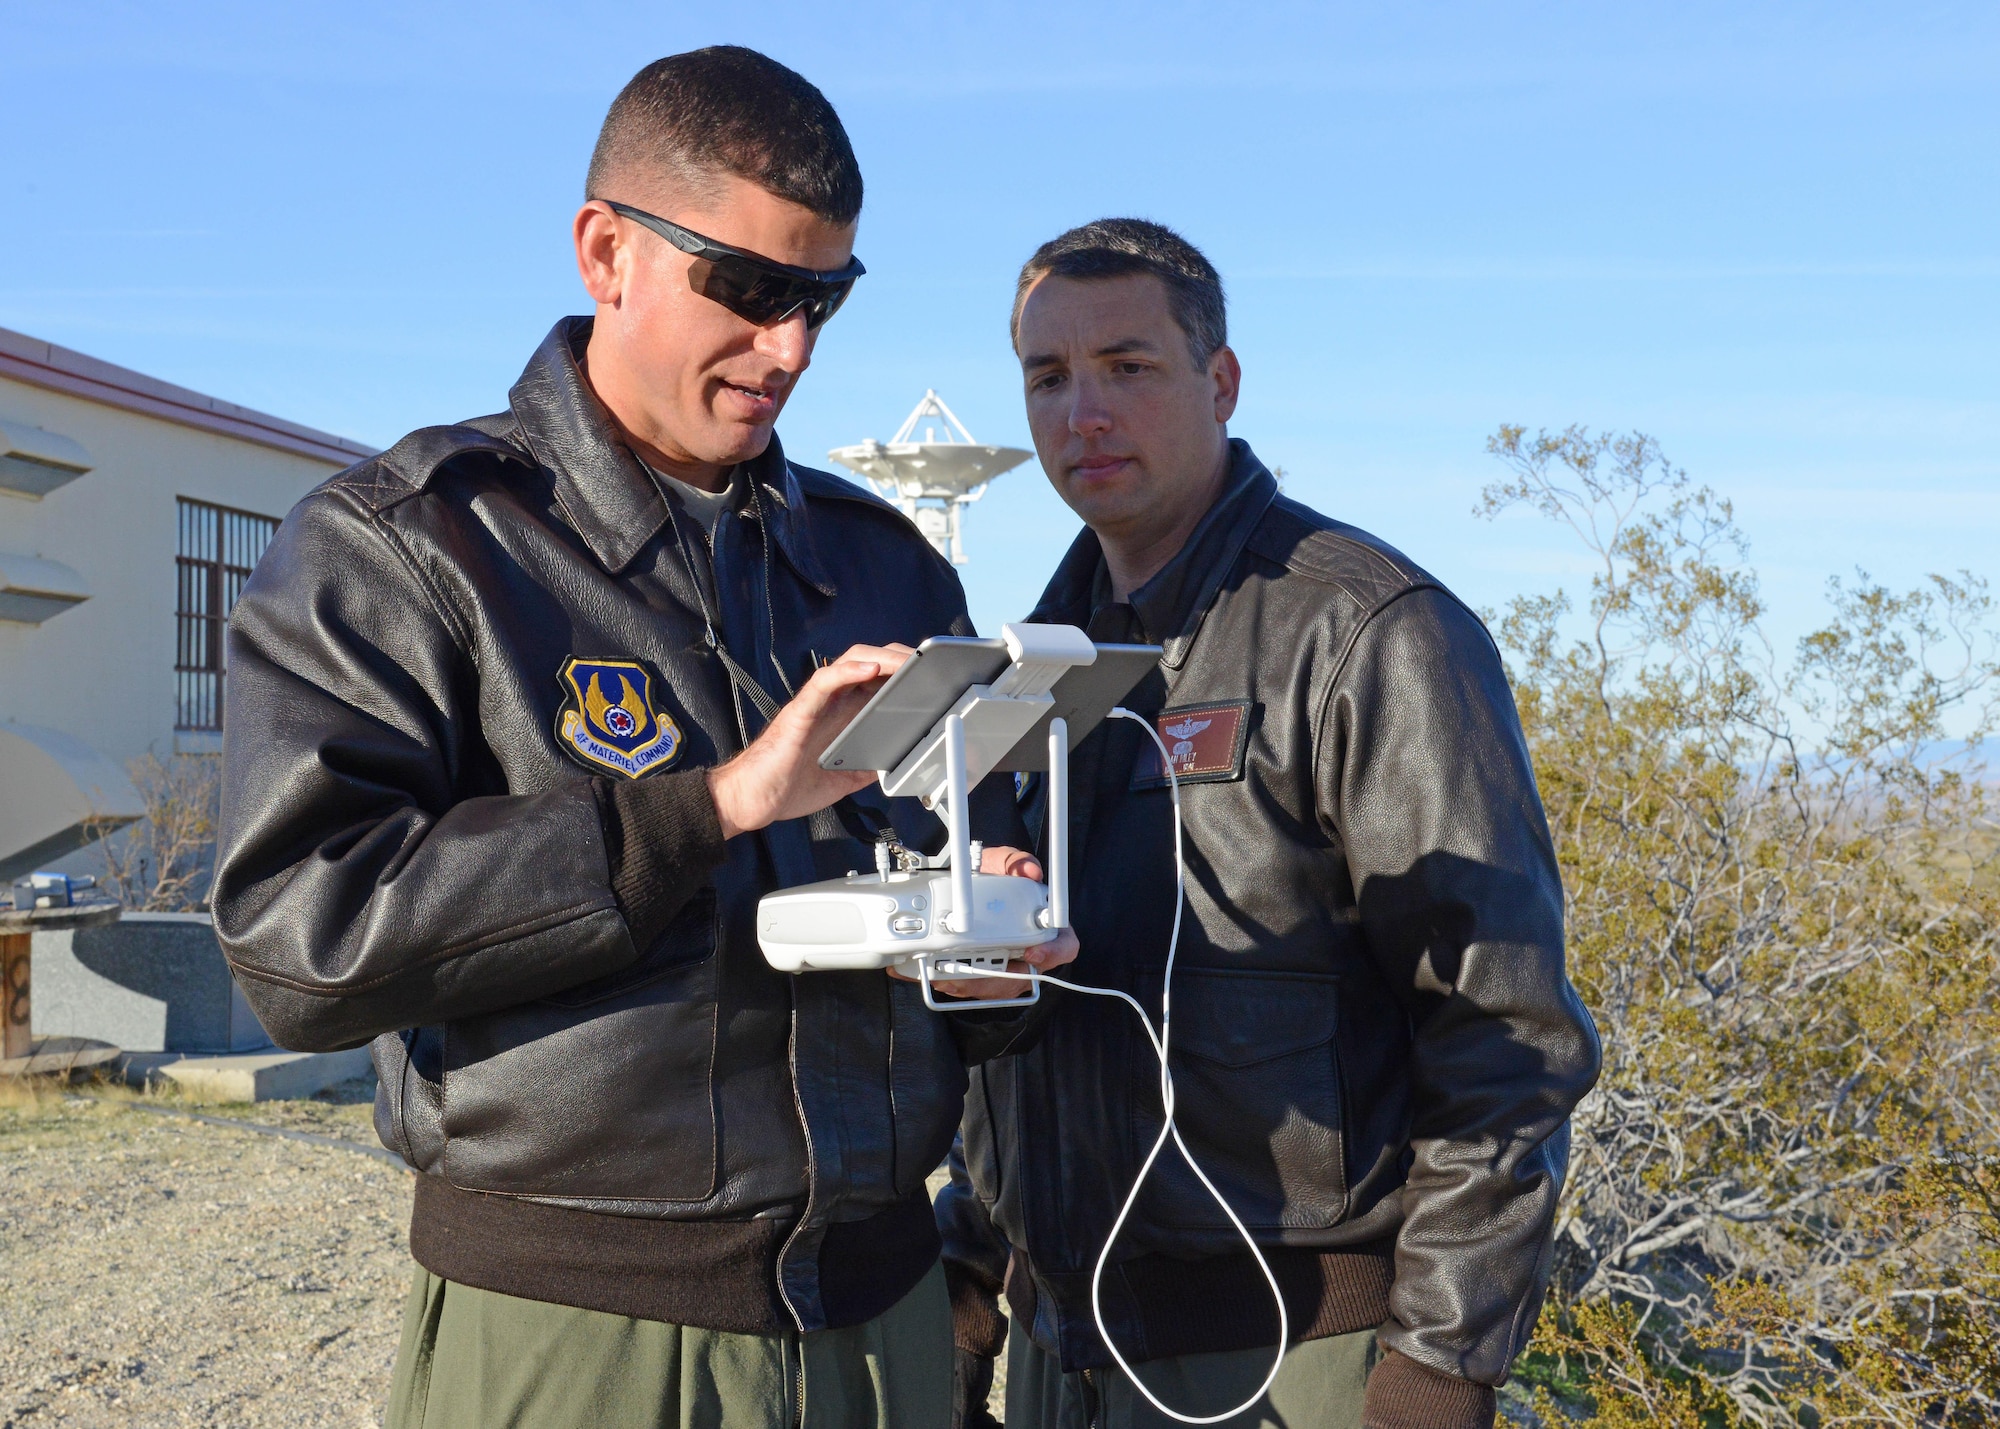 Maj. William Niblack, Emerging Technologies Combined Test Force, operations officer (left), pilots a quadcopter on the second test sortie Feb. 13. Maj. Danny Riley, ET CTF director (right) piloted the third and final sortie. The test was conducted to see if it’s possible to use a small unmanned aerial system to calibrate Edwards AFB’s telemetry antennas. (U.S. Air Force photo by Kenji Thuloweit)